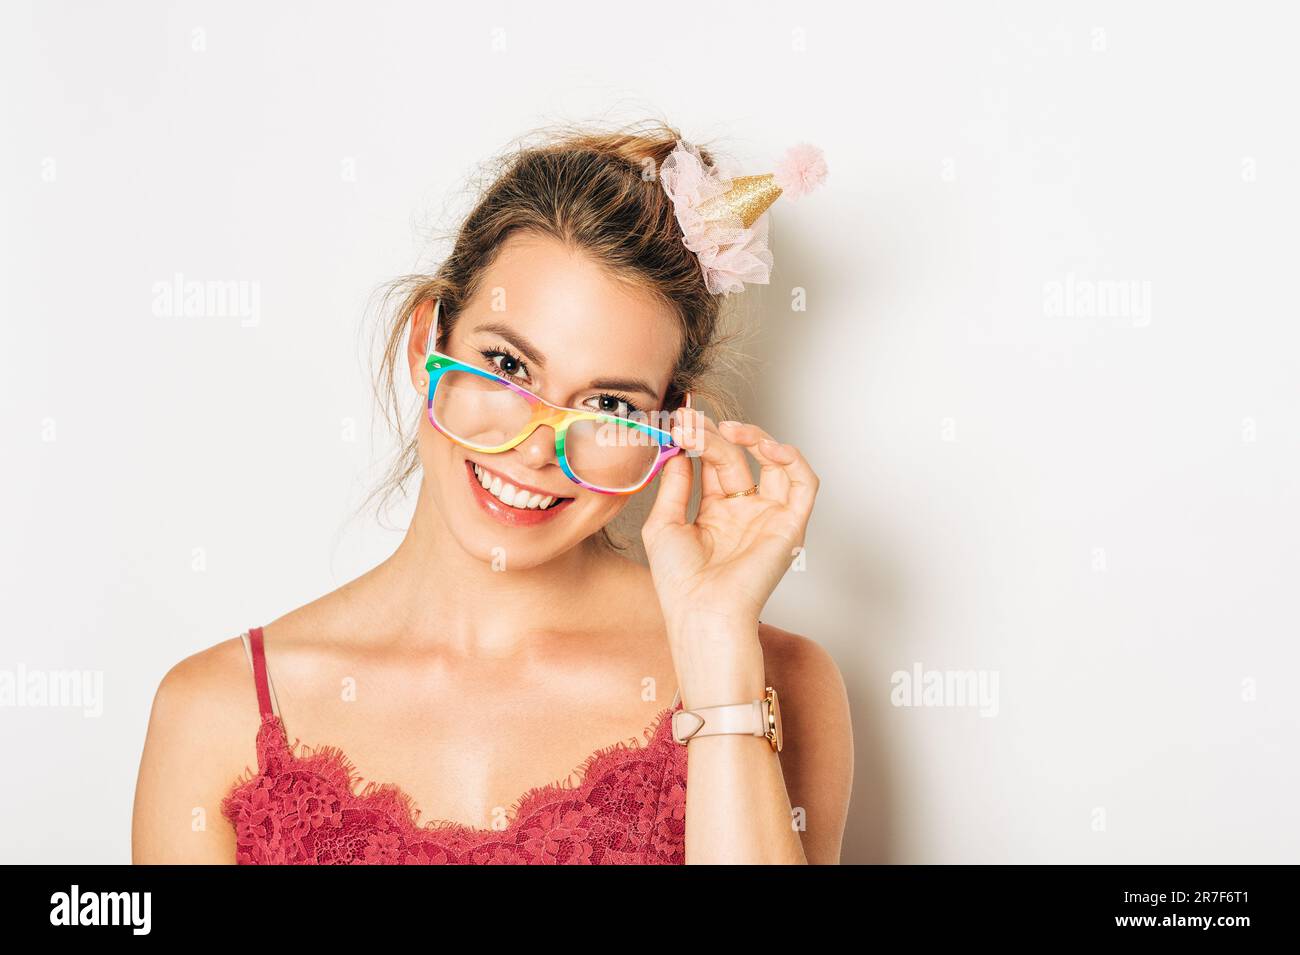 Studio shot of beautiful young woman with blond hair, chignon bun, wearing pink cami top, colorful glasses, posing on white background Stock Photo